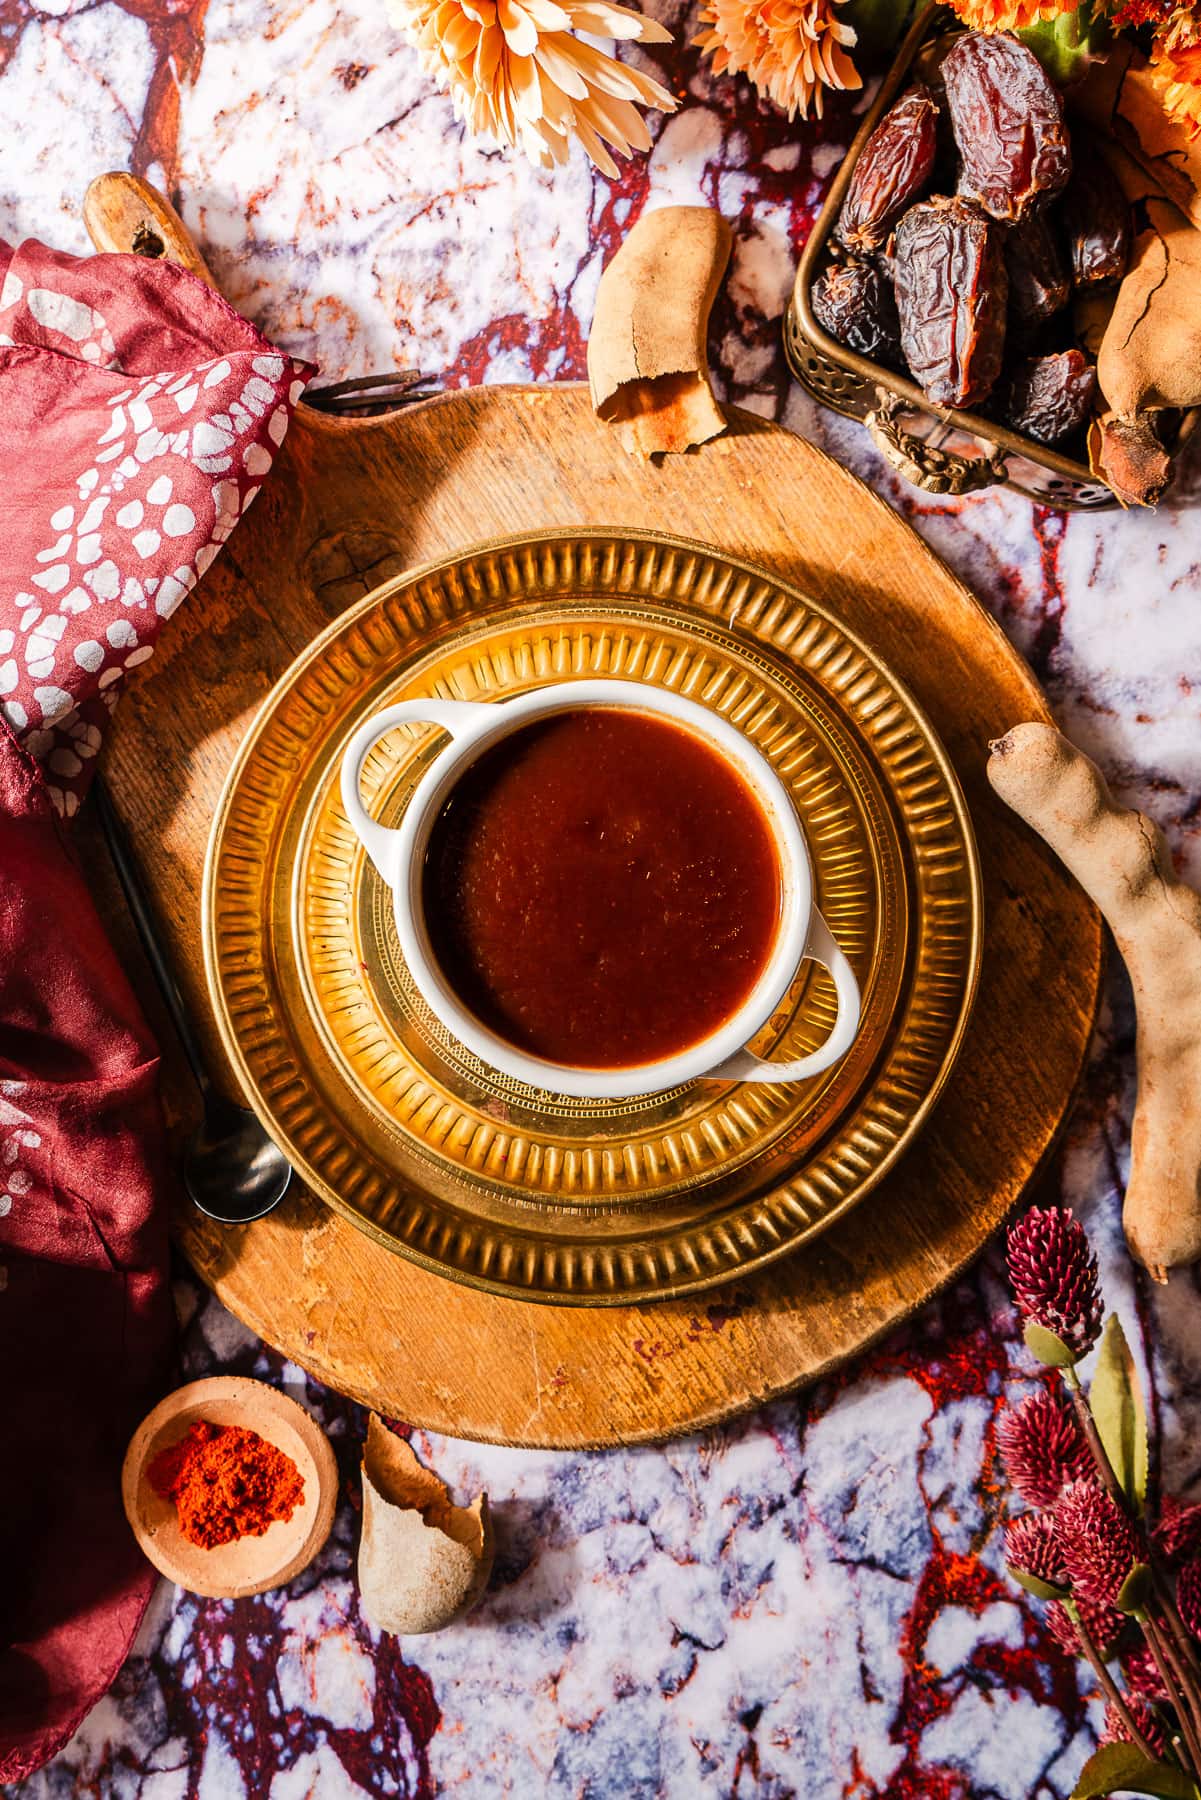 A cocotte full of imli chutney in layered gold plates surrounded by fresh tamarind, dates, and flowers.